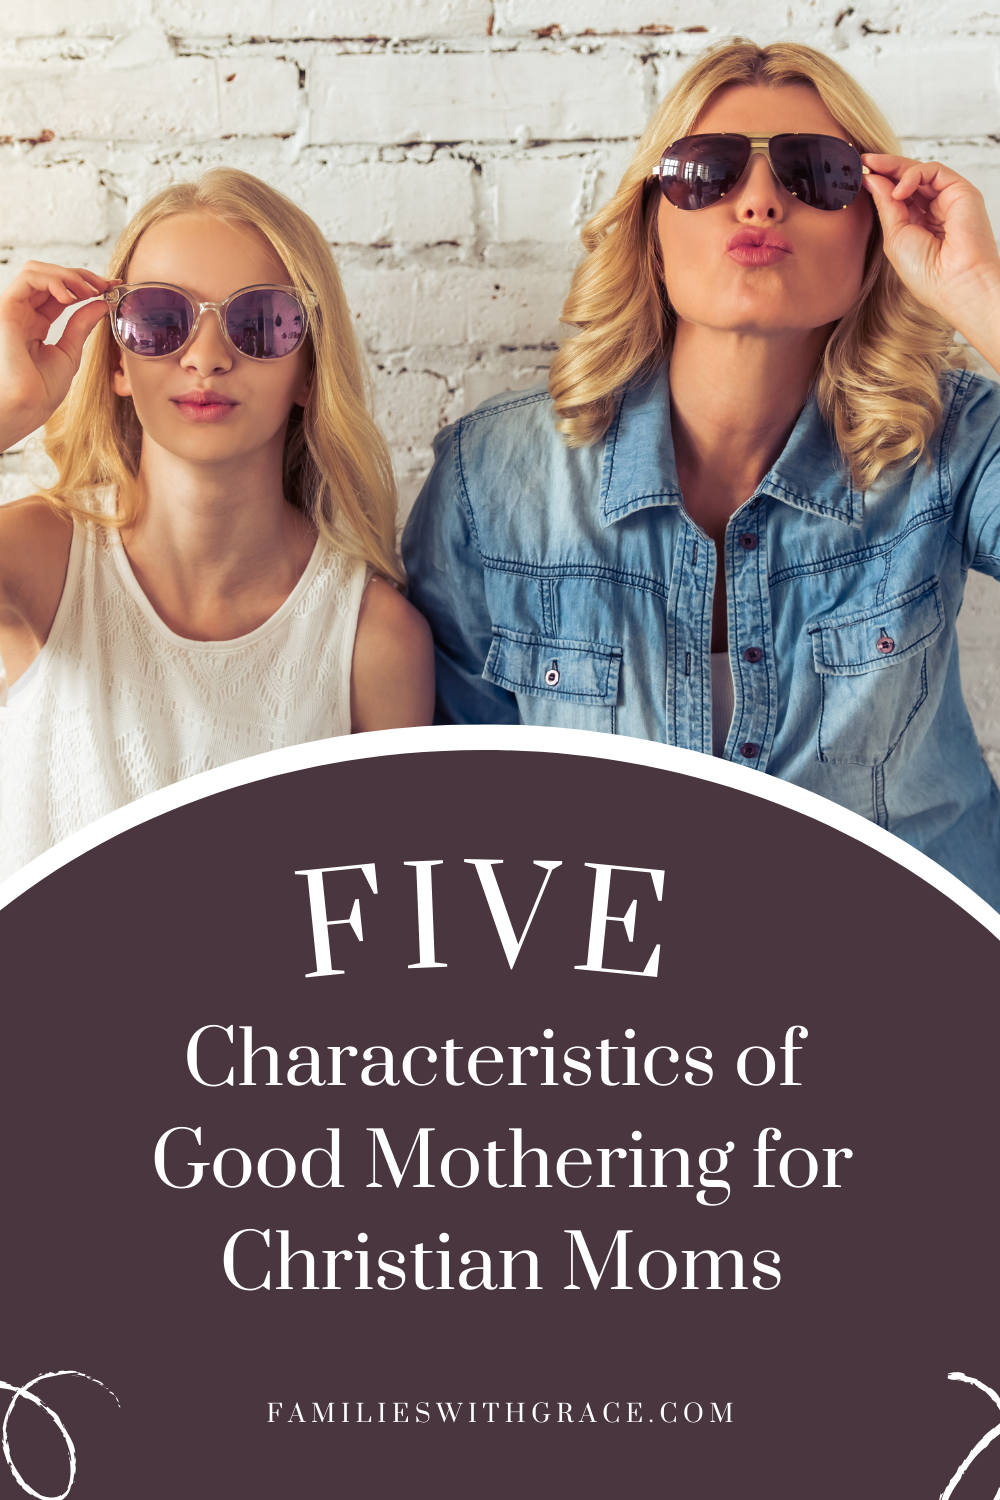 5 Characteristics of good mothering for Christian moms